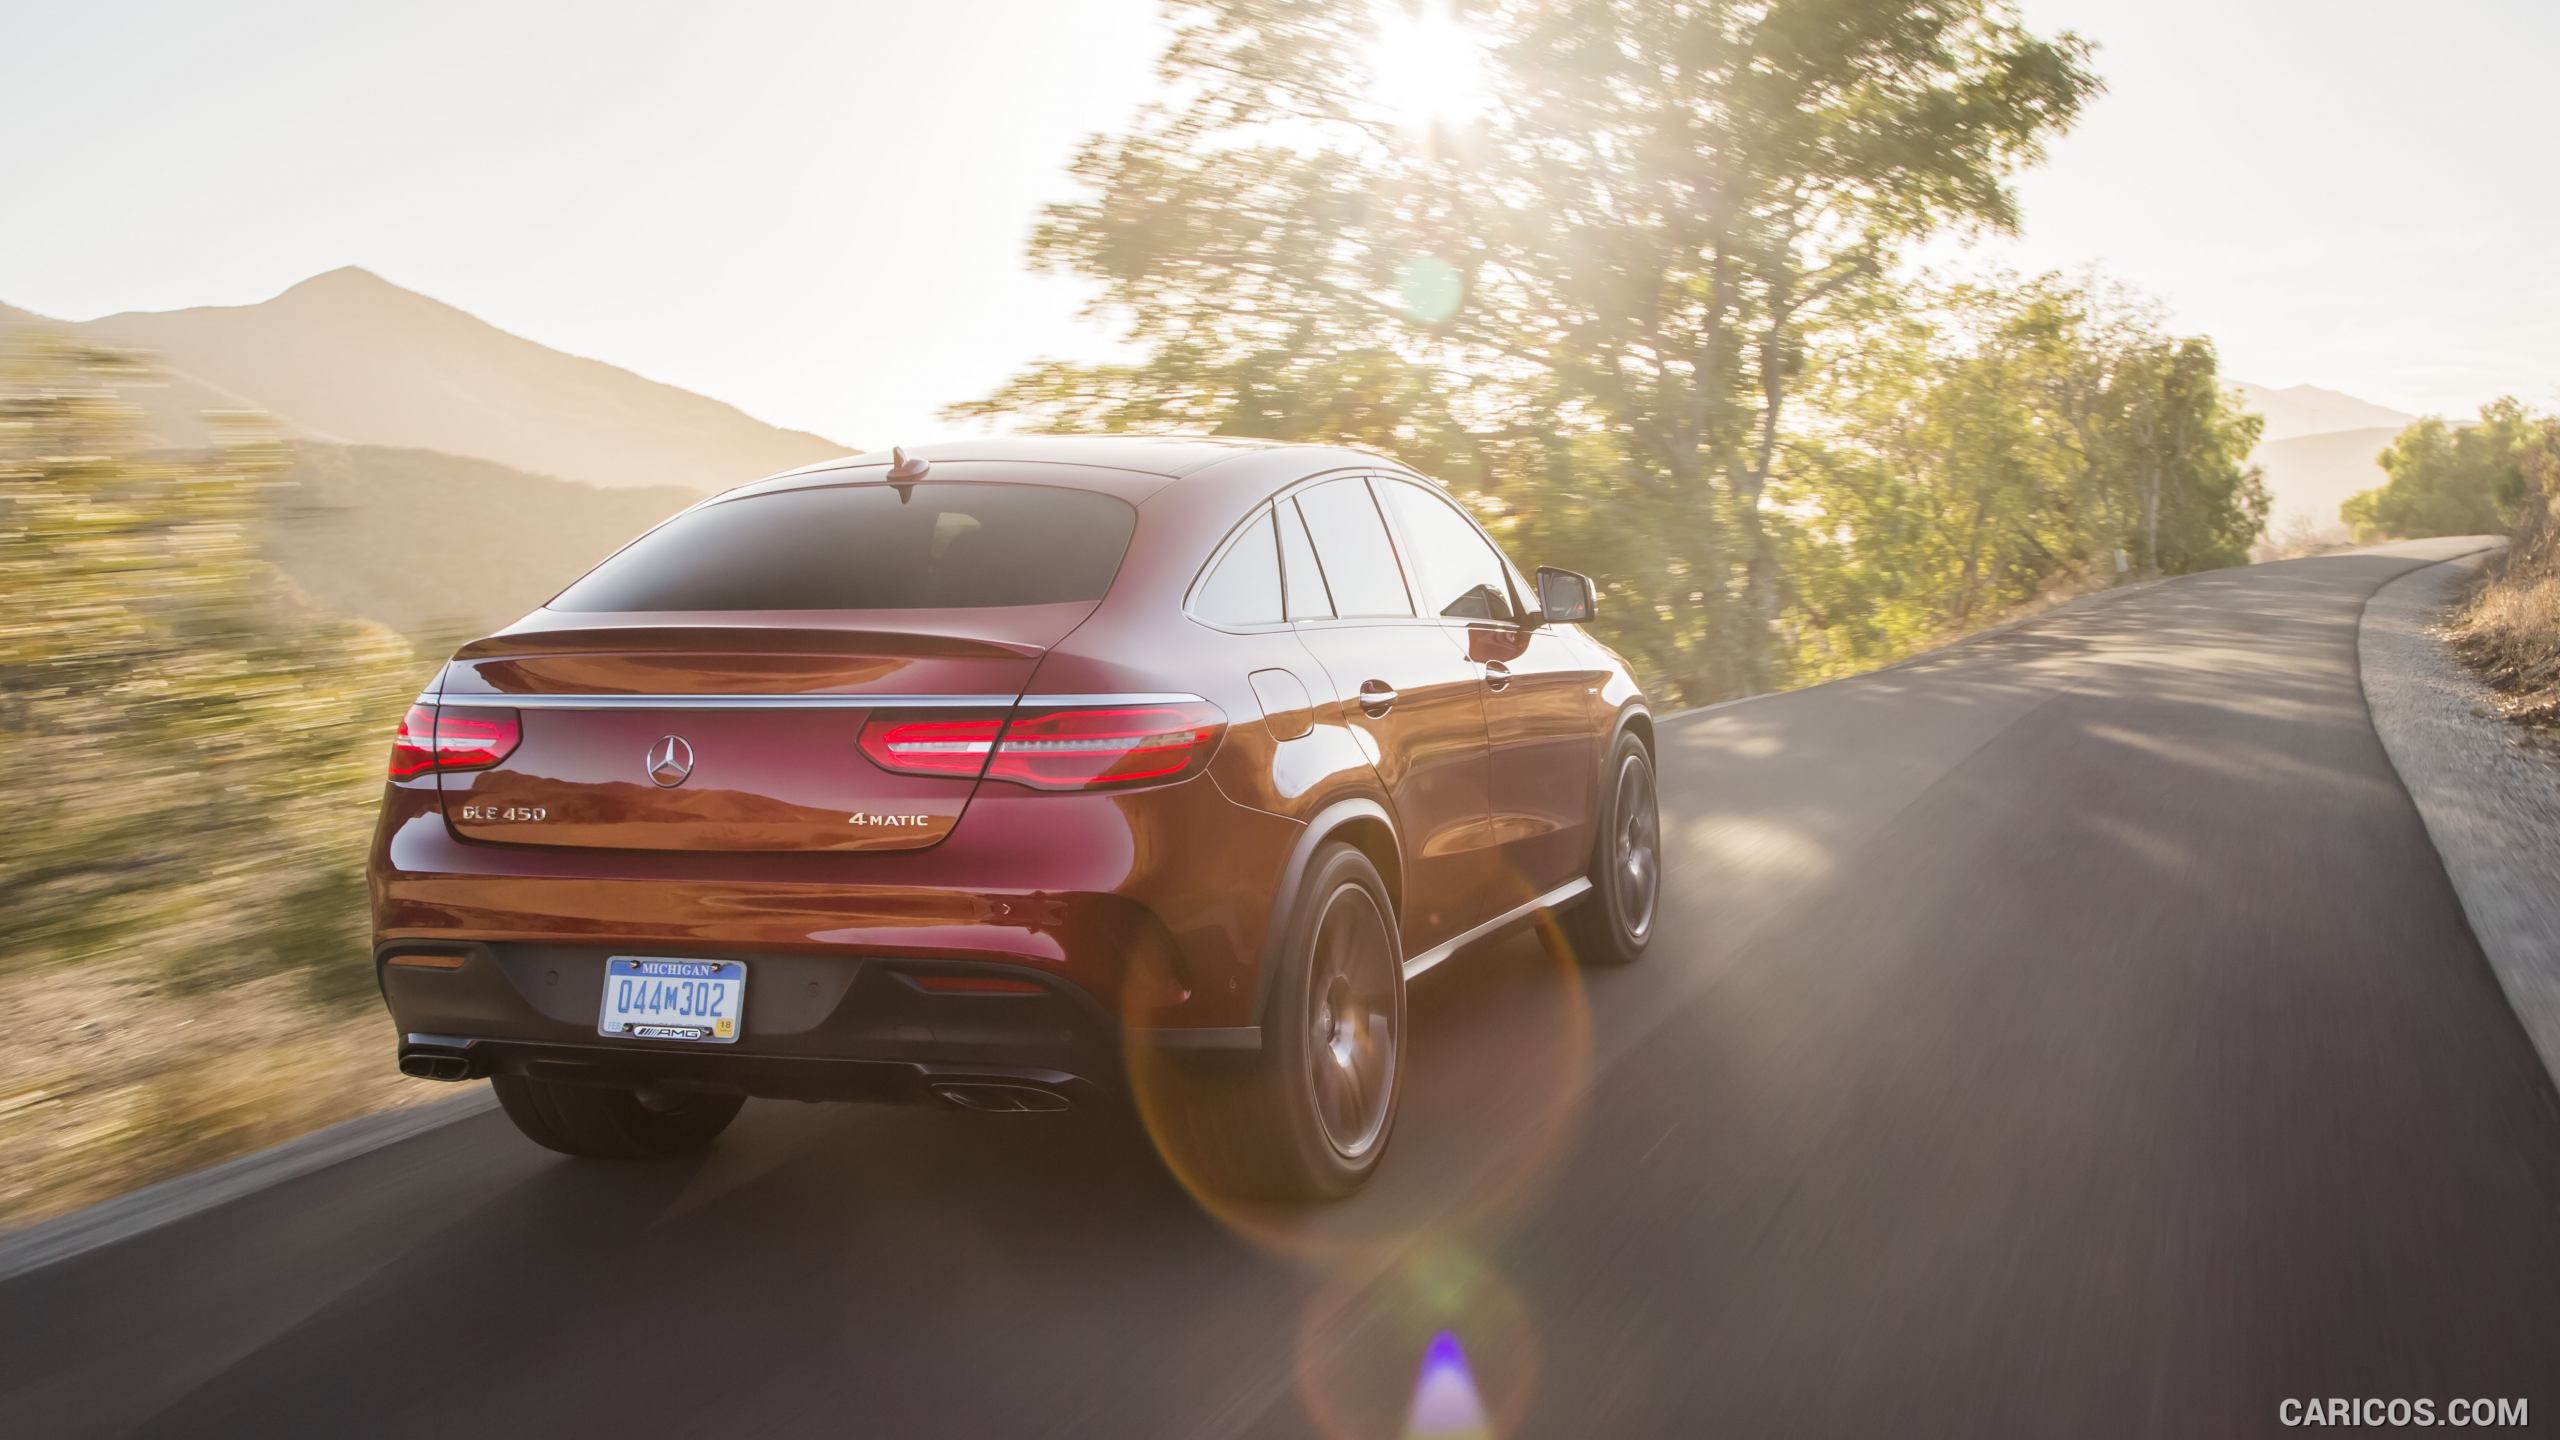 2016 Mercedes-Benz GLE 450 AMG Coupe 4MATIC (US-Spec) - Rear, #107 of 115